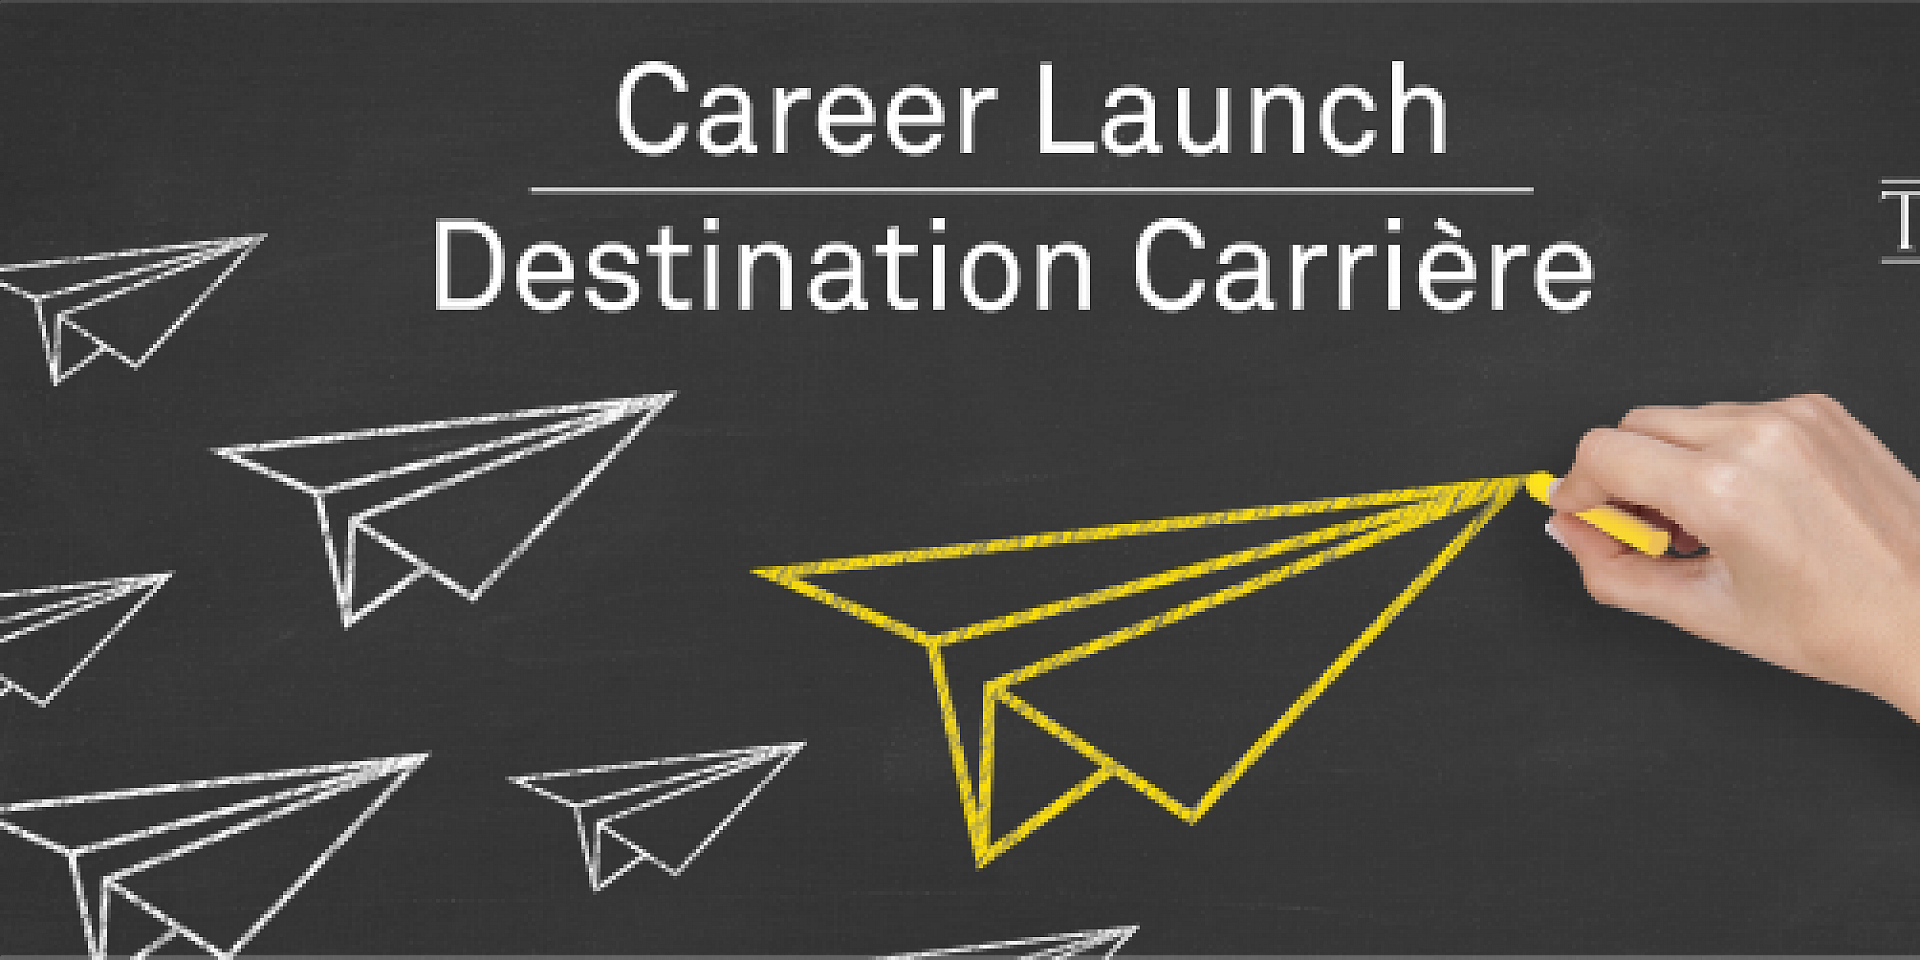 Black board with the words "Career Launch" written on it